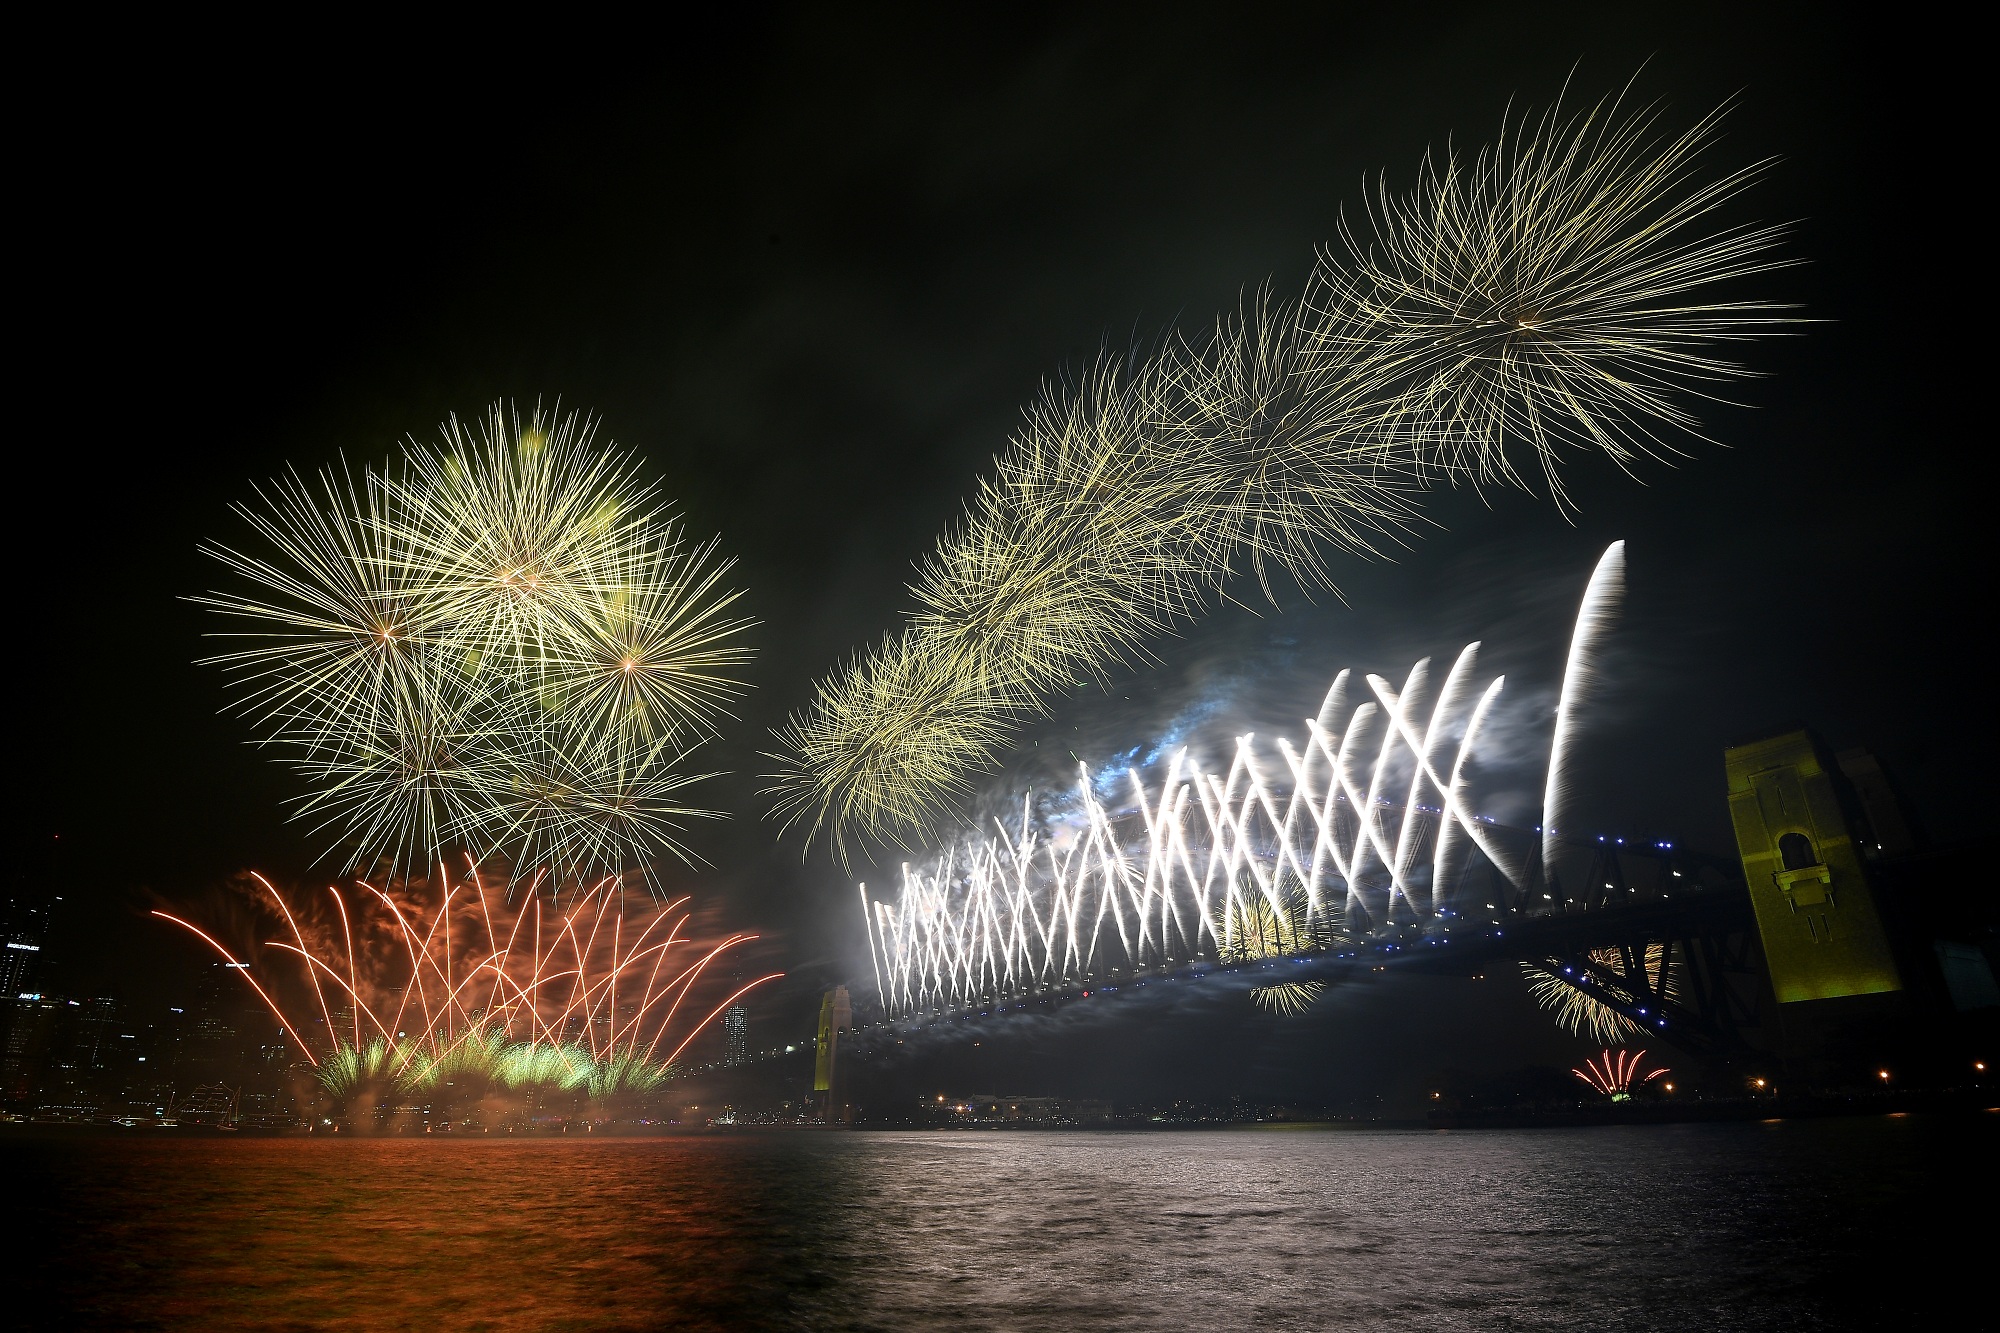 Fireworks explode above the Sydney Harbour Bridge, as seen from Kirribilli during New Year's Eve celebrations in Sydney